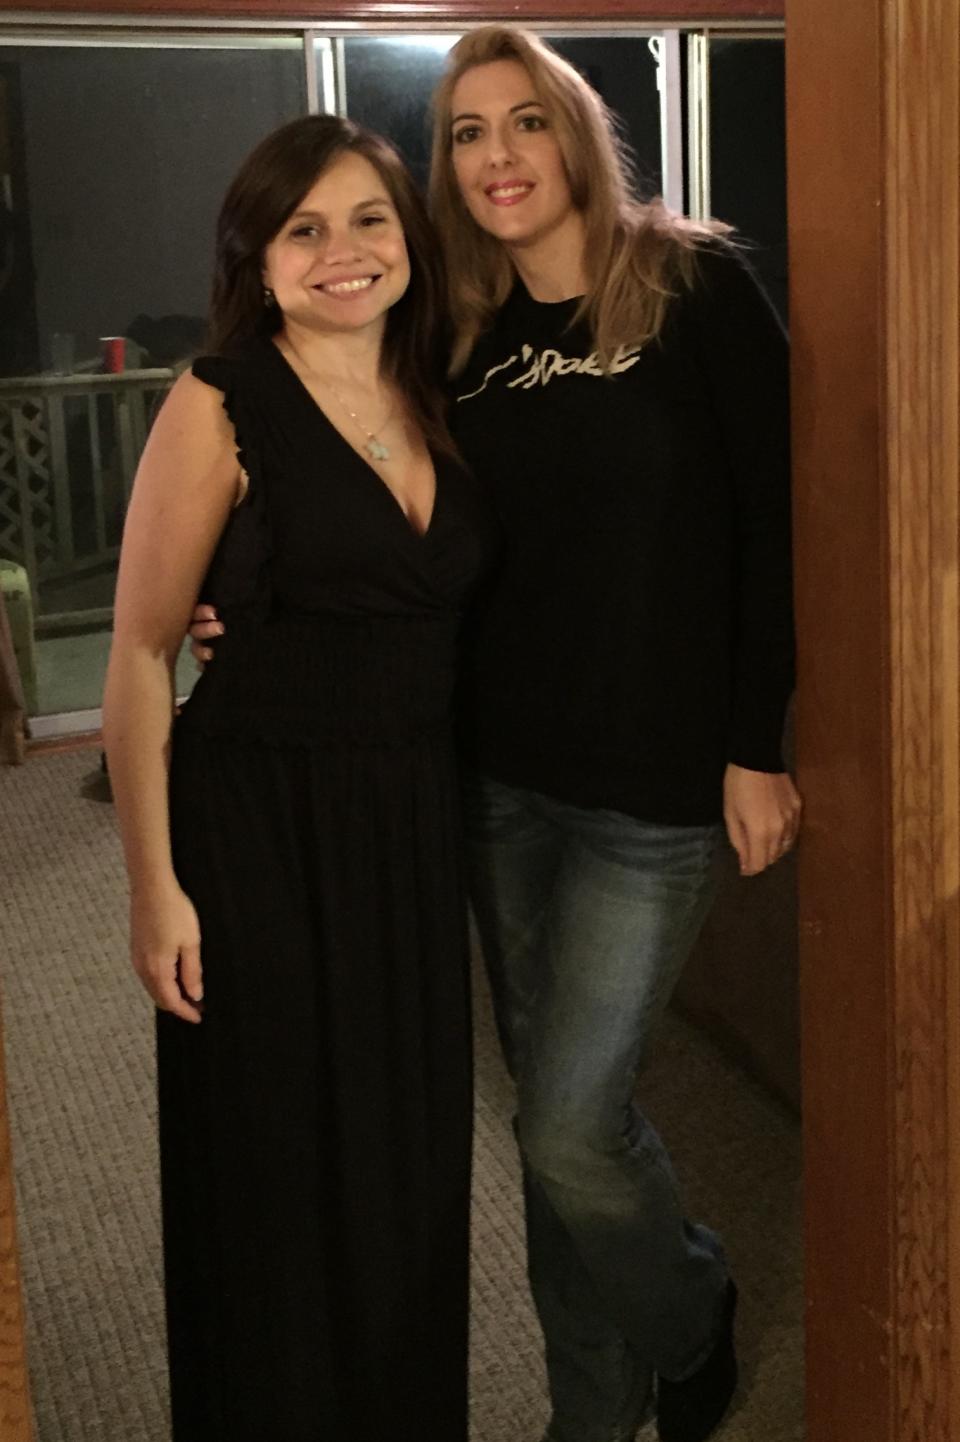 Jessica and her friend, Maria Creel. (Photo provided by family.)